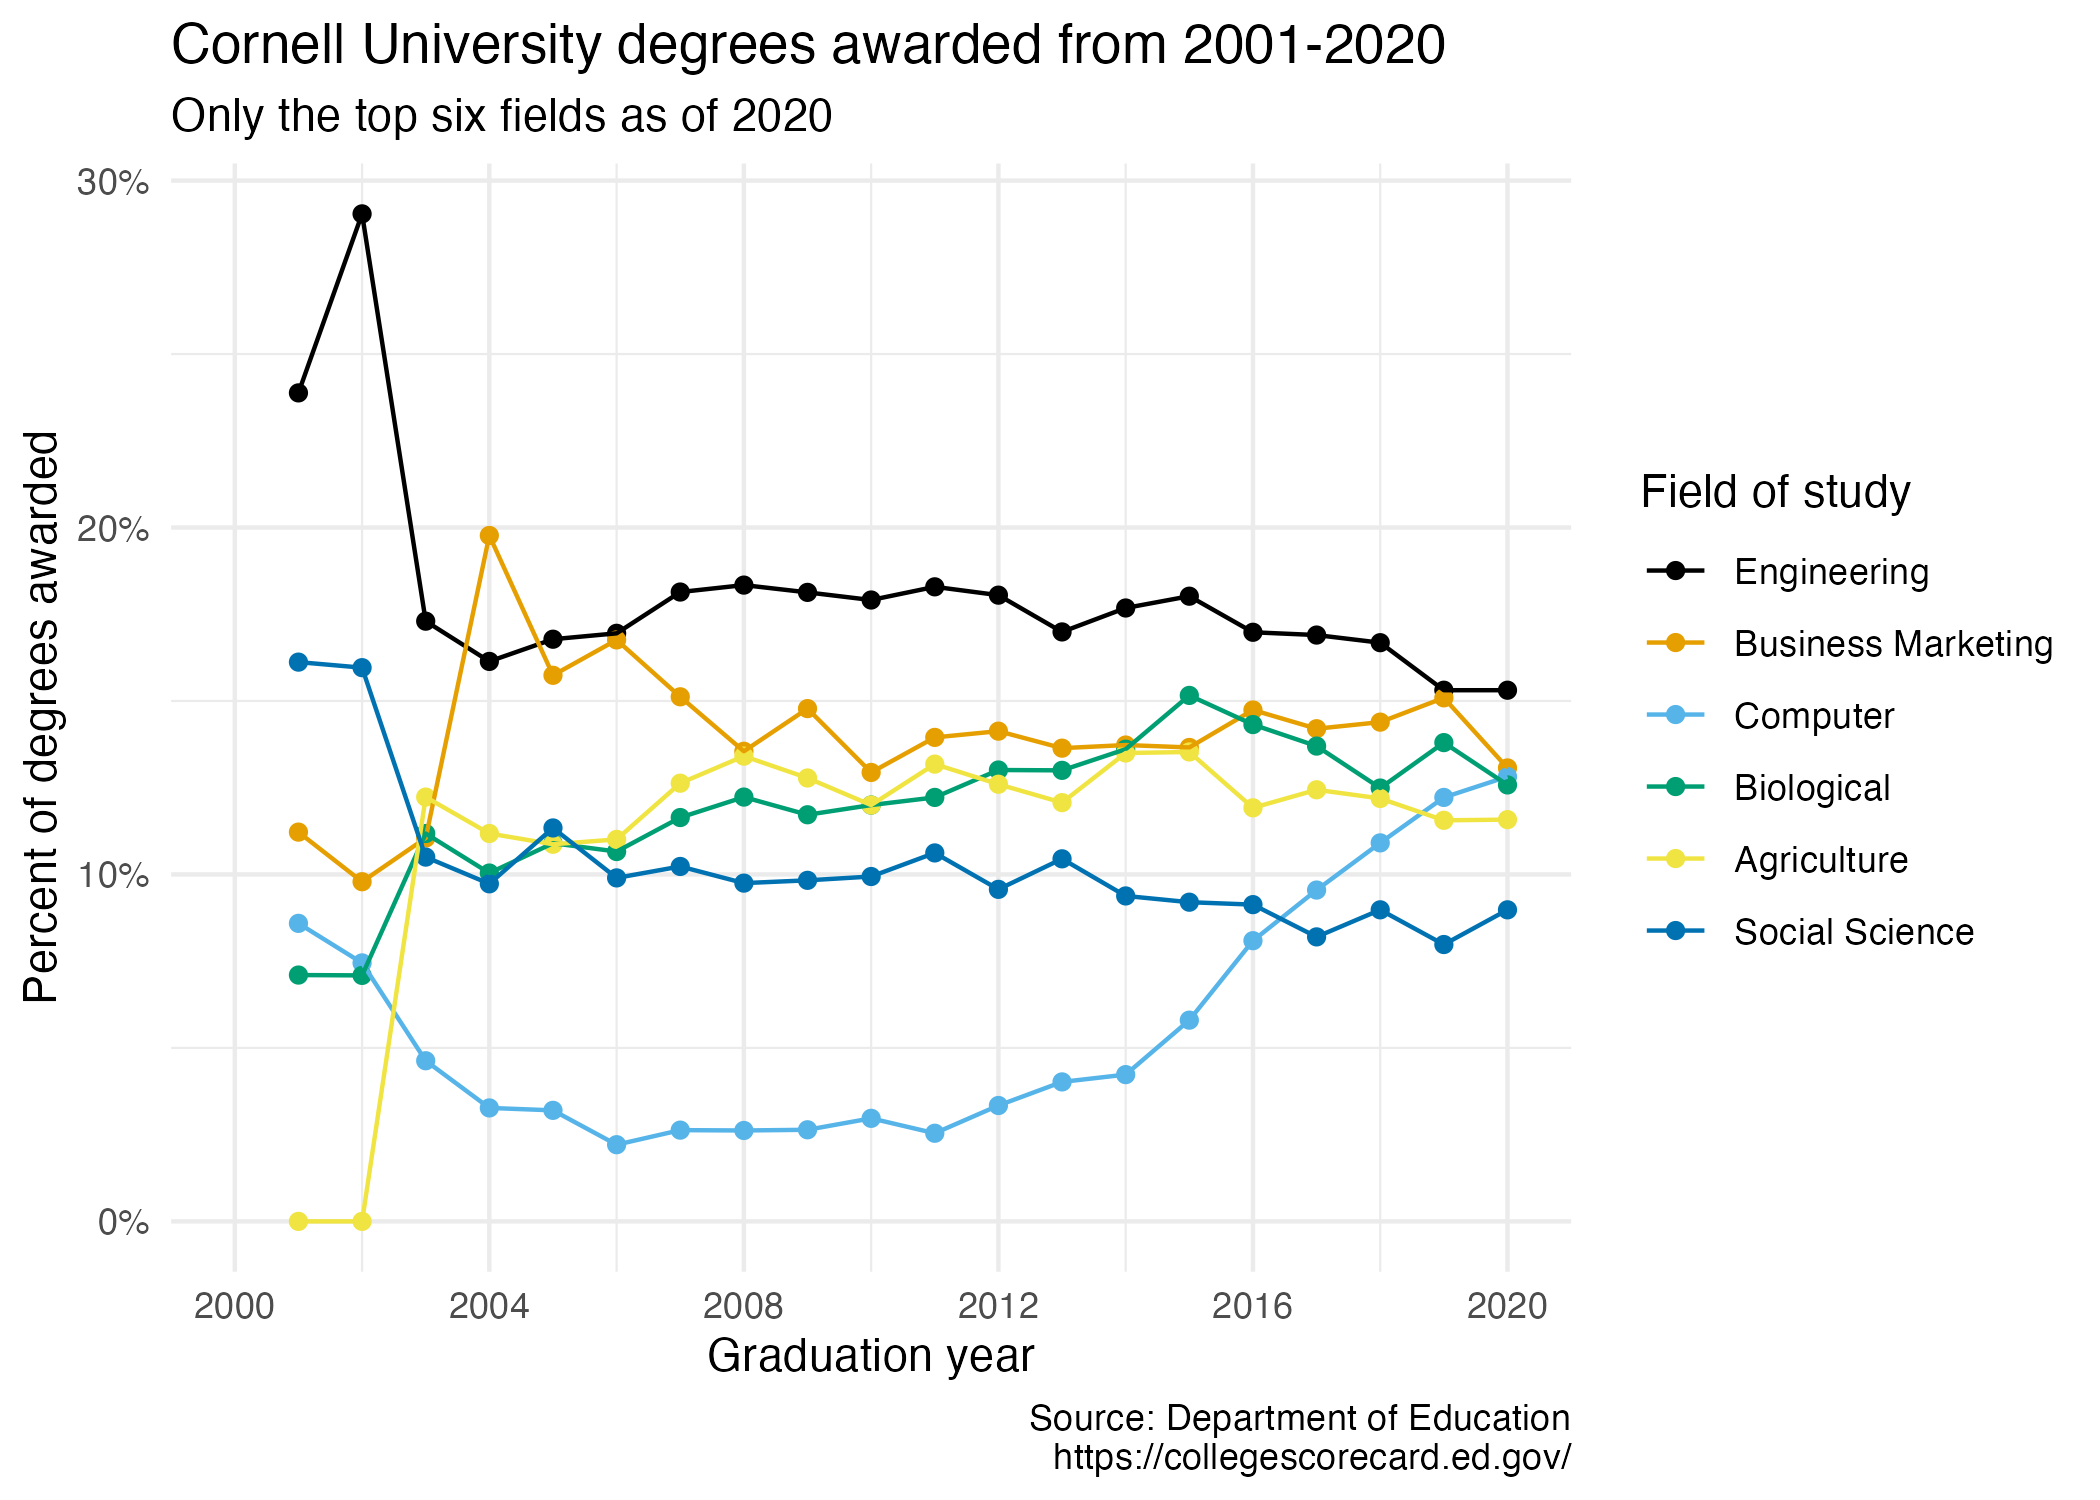 Line plot of numbers of Cornell degrees awarded in six fields of study from 2001 to 2020.